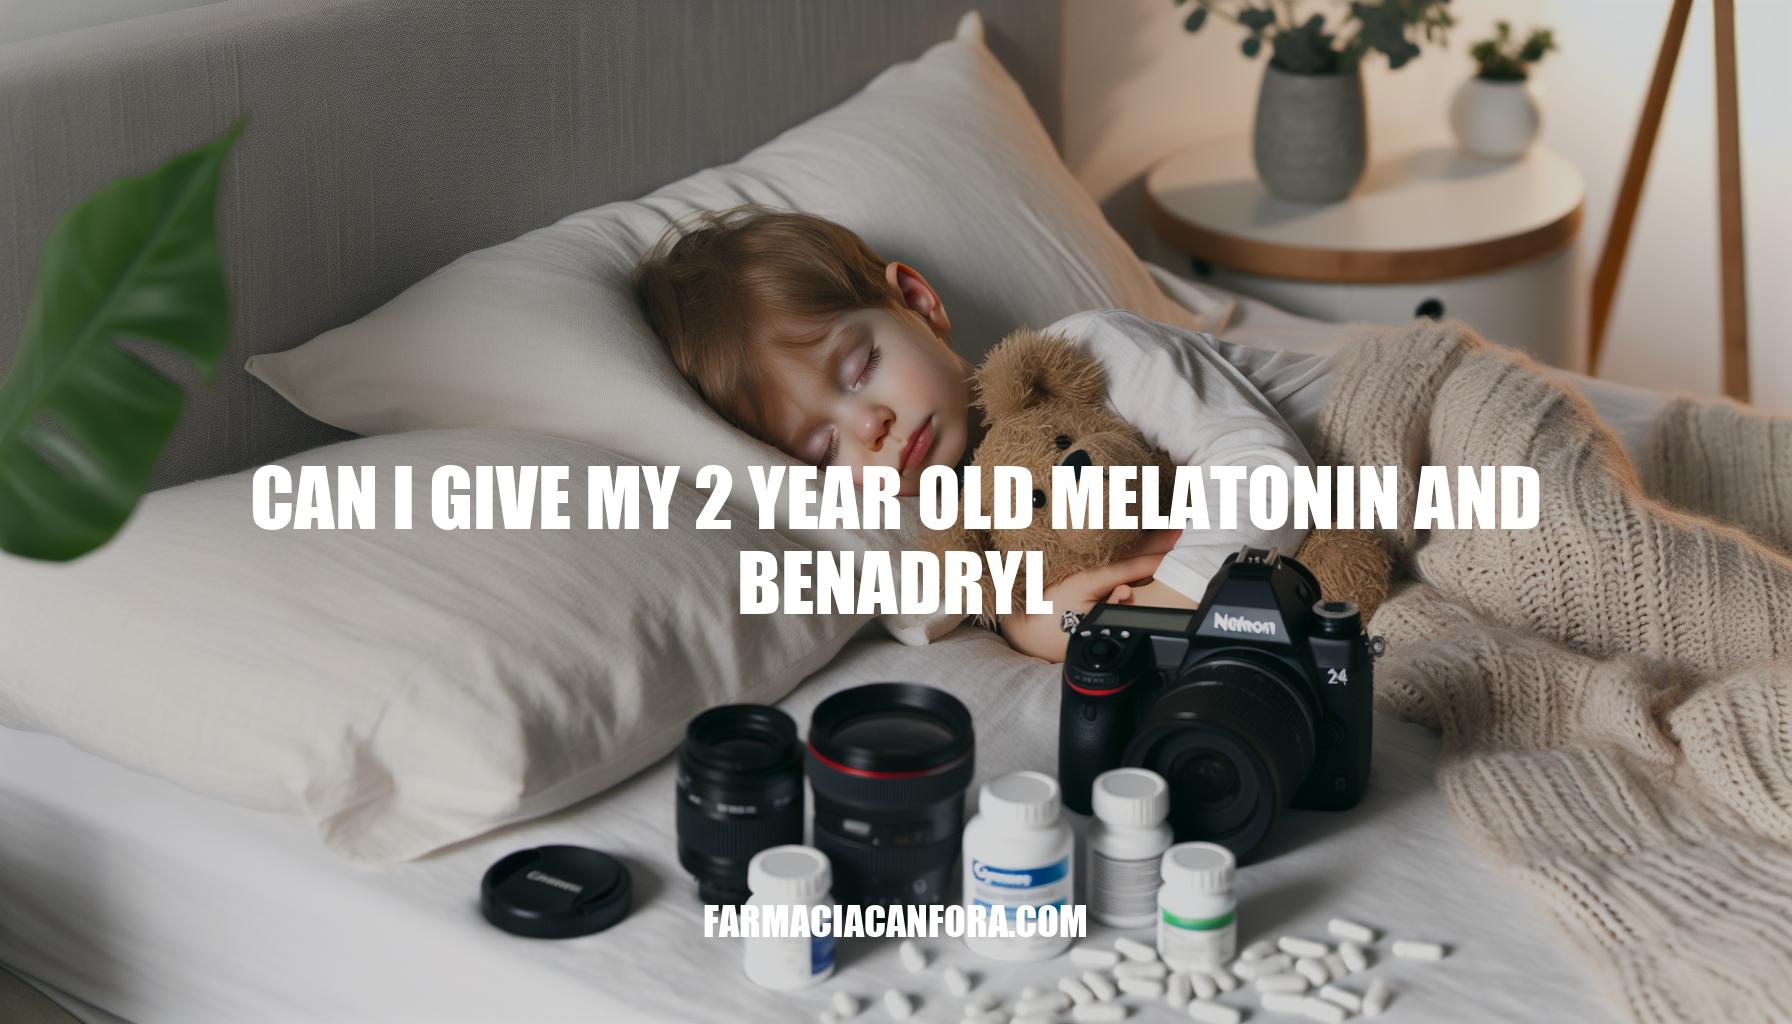 Can I Give My 2 Year Old Melatonin and Benadryl: Safety Tips and Risks to Consider